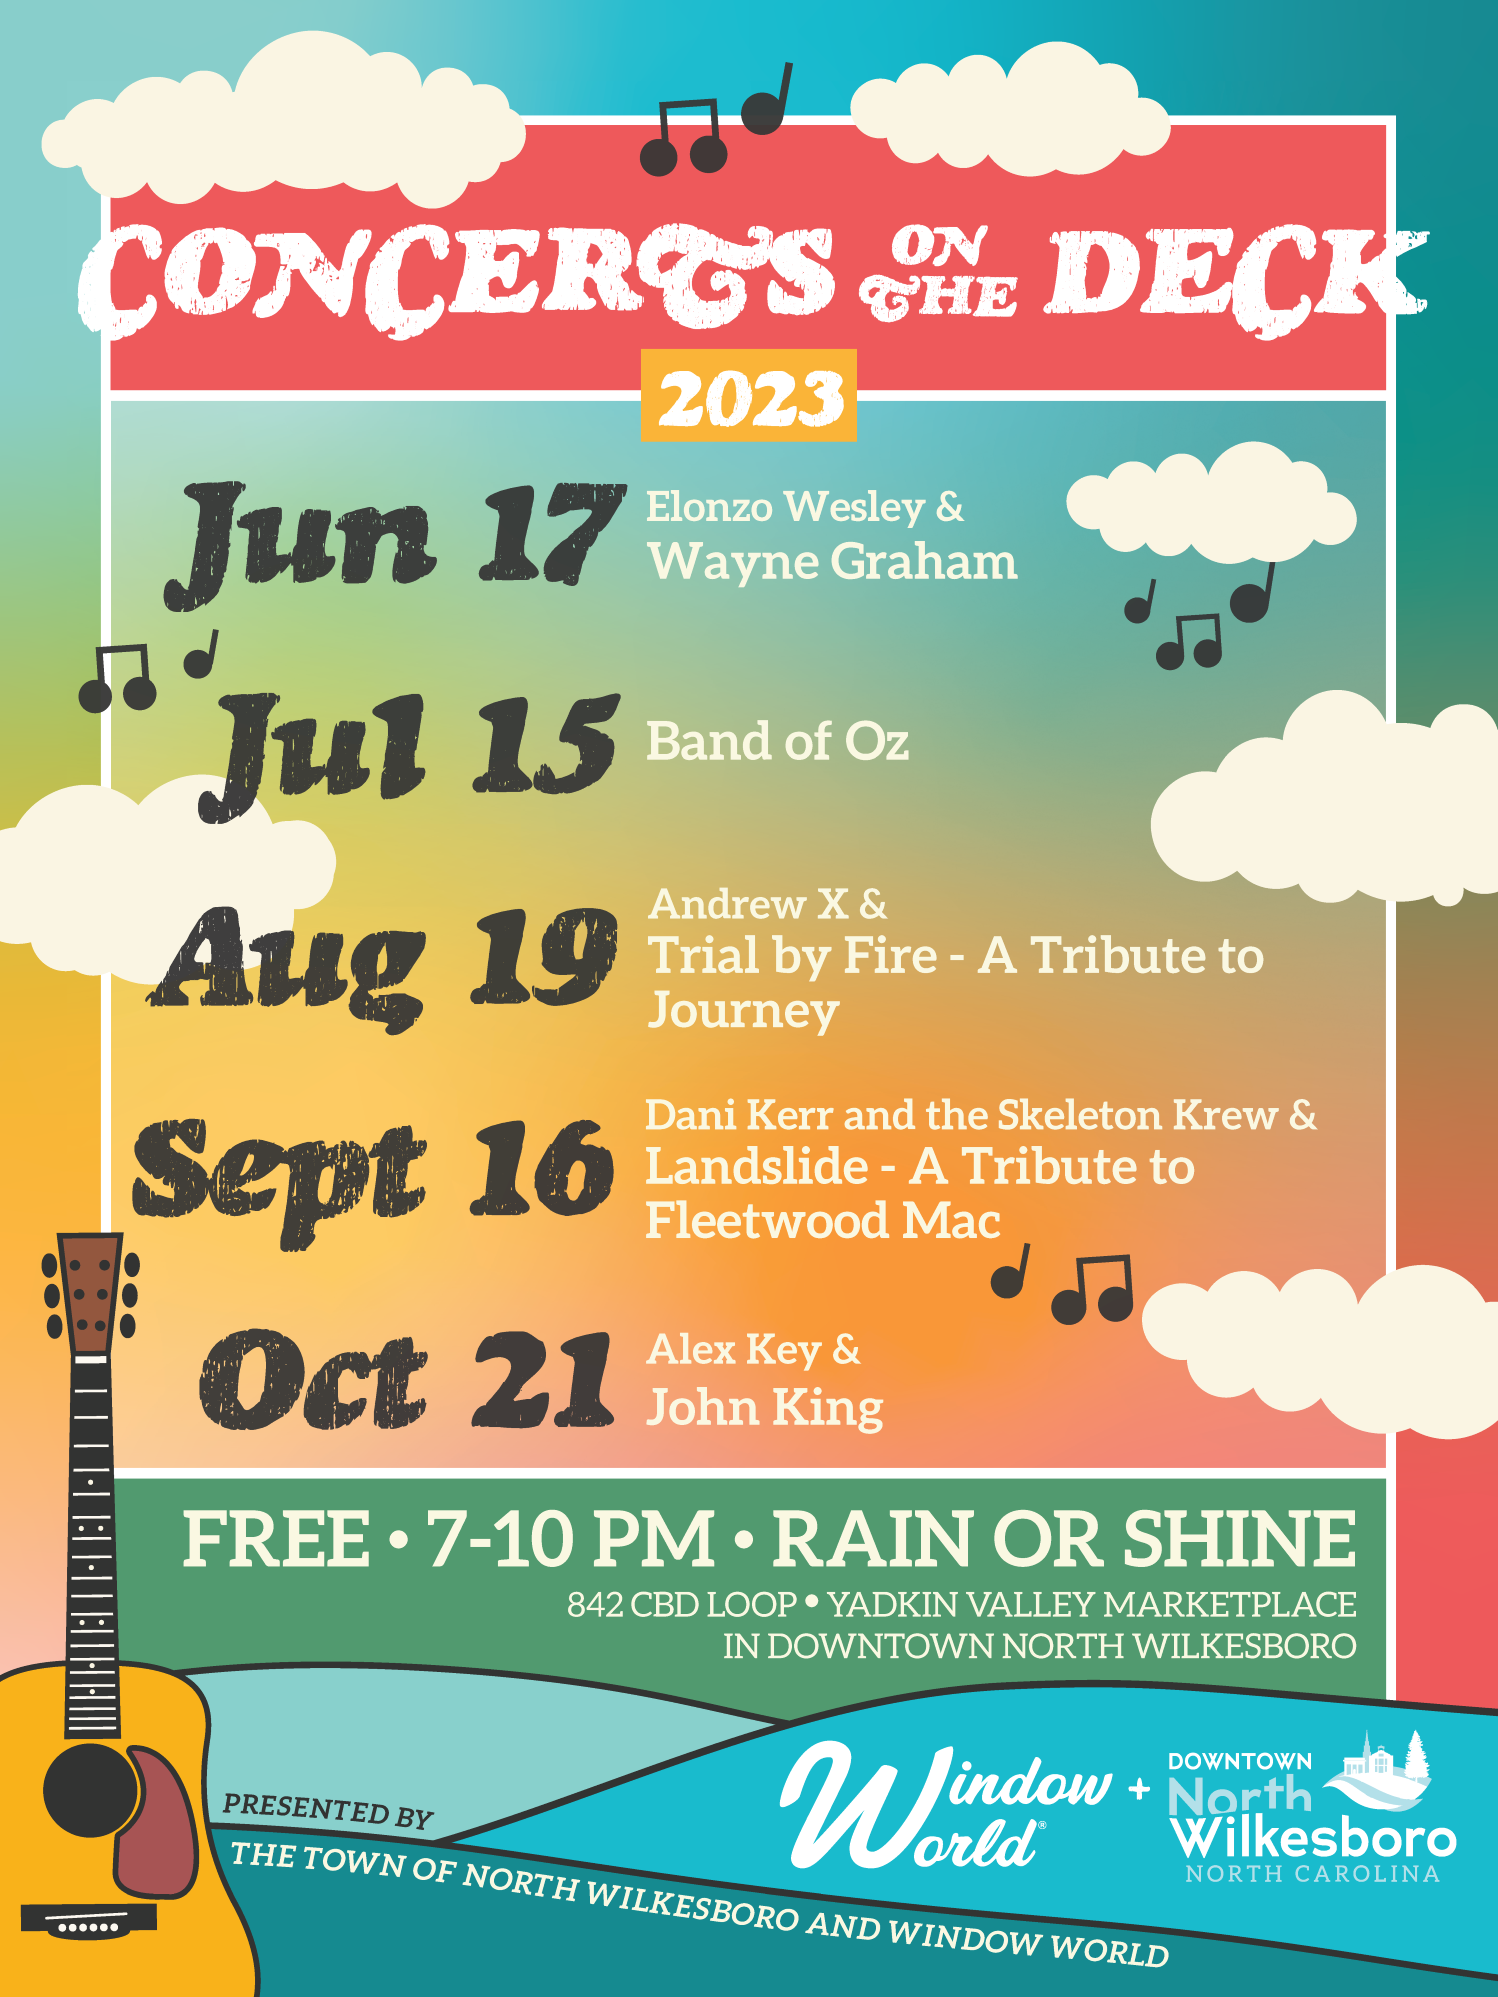 Concerts on the Deck lineup for 2023 with dates June 17th, July 15th, August 19th, September 16th, and October 21st